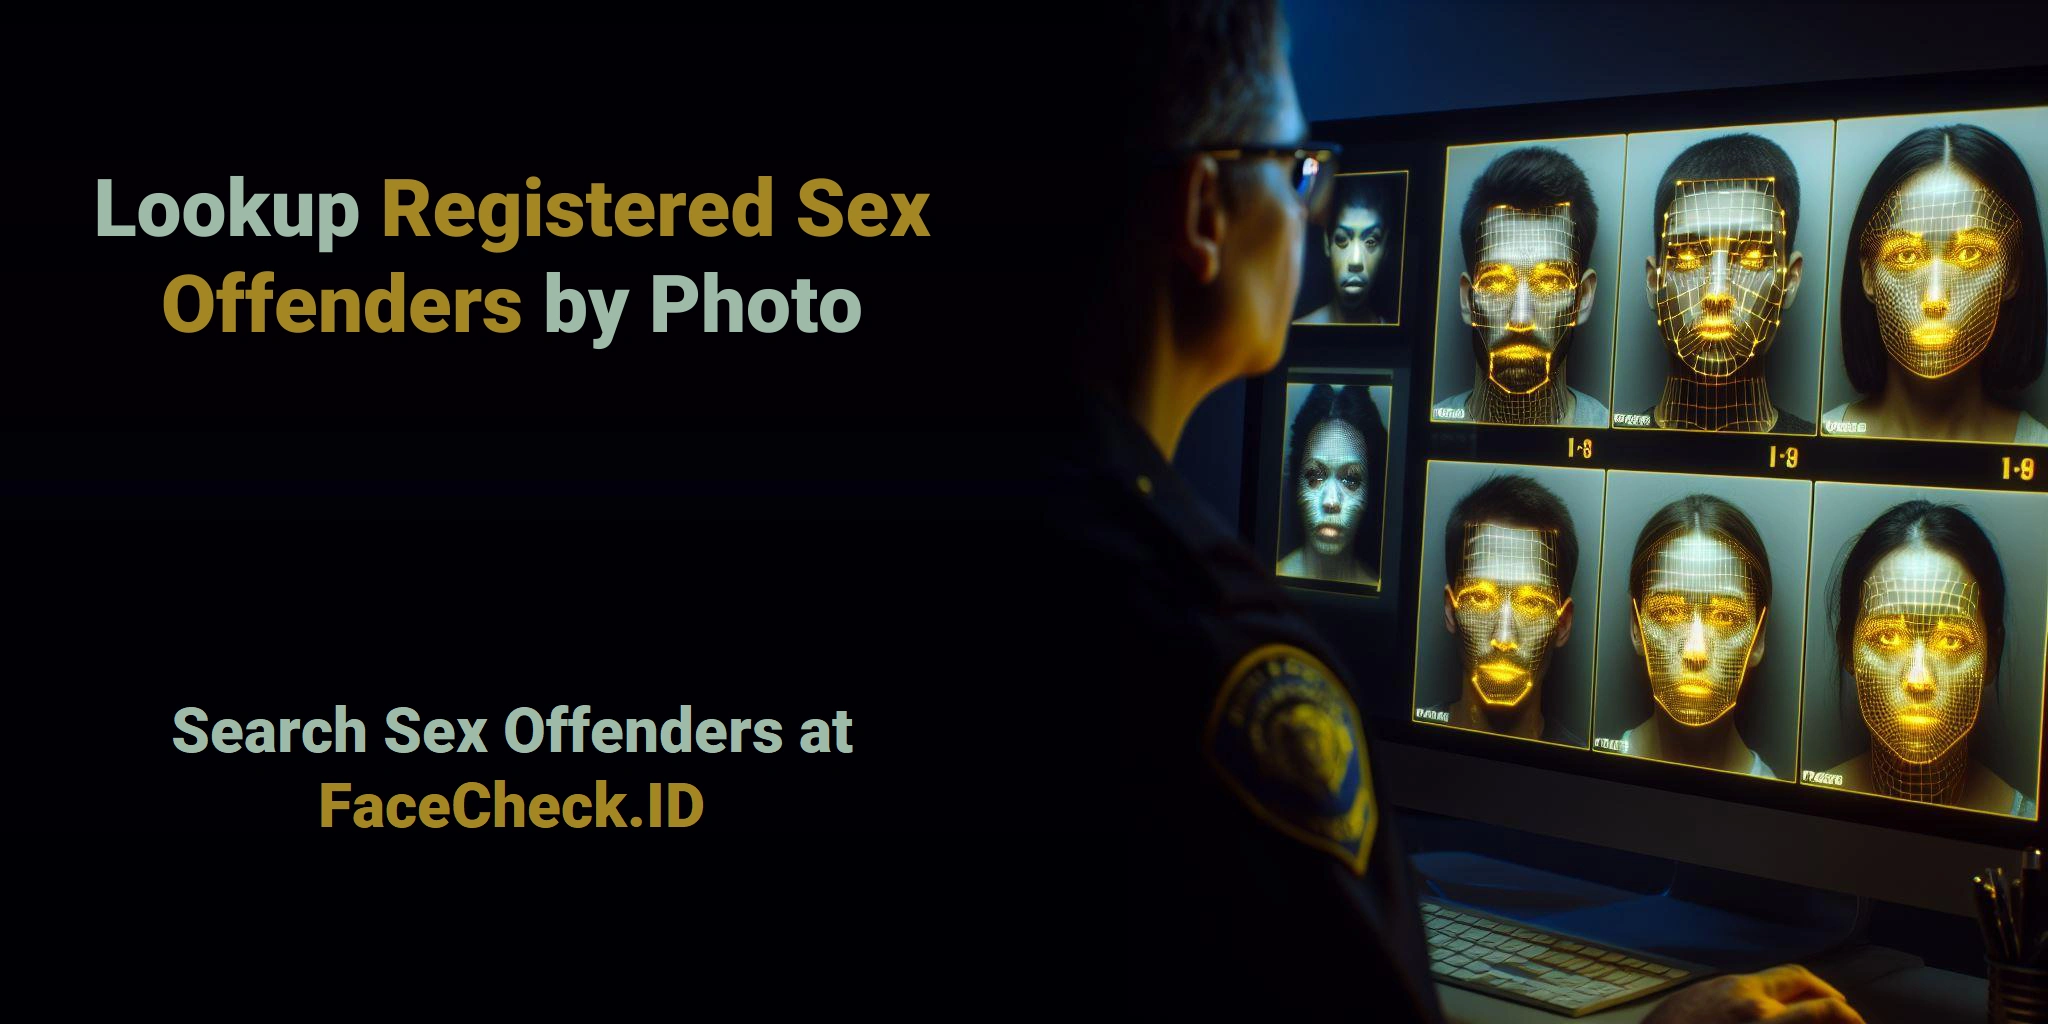 Lookup Registered Sex Offenders by Photo Search Sex Offenders at FaceCheck.ID